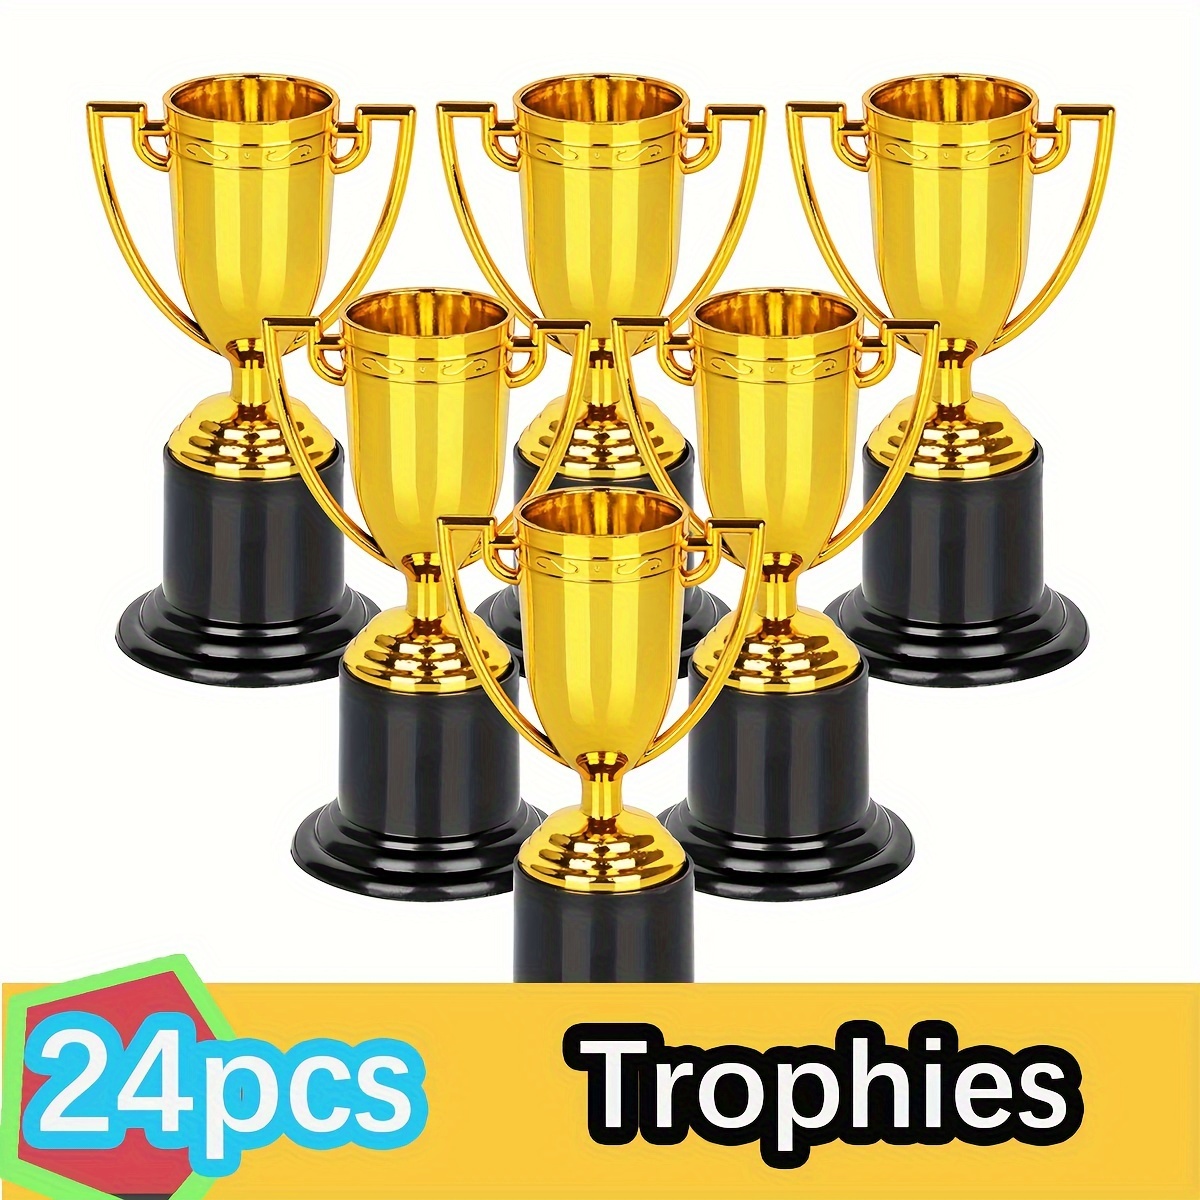 

24pcs Mini Trophies Awards, Gold Participation Trophy Cups For Sports Tournaments And Competitions, Party Favors